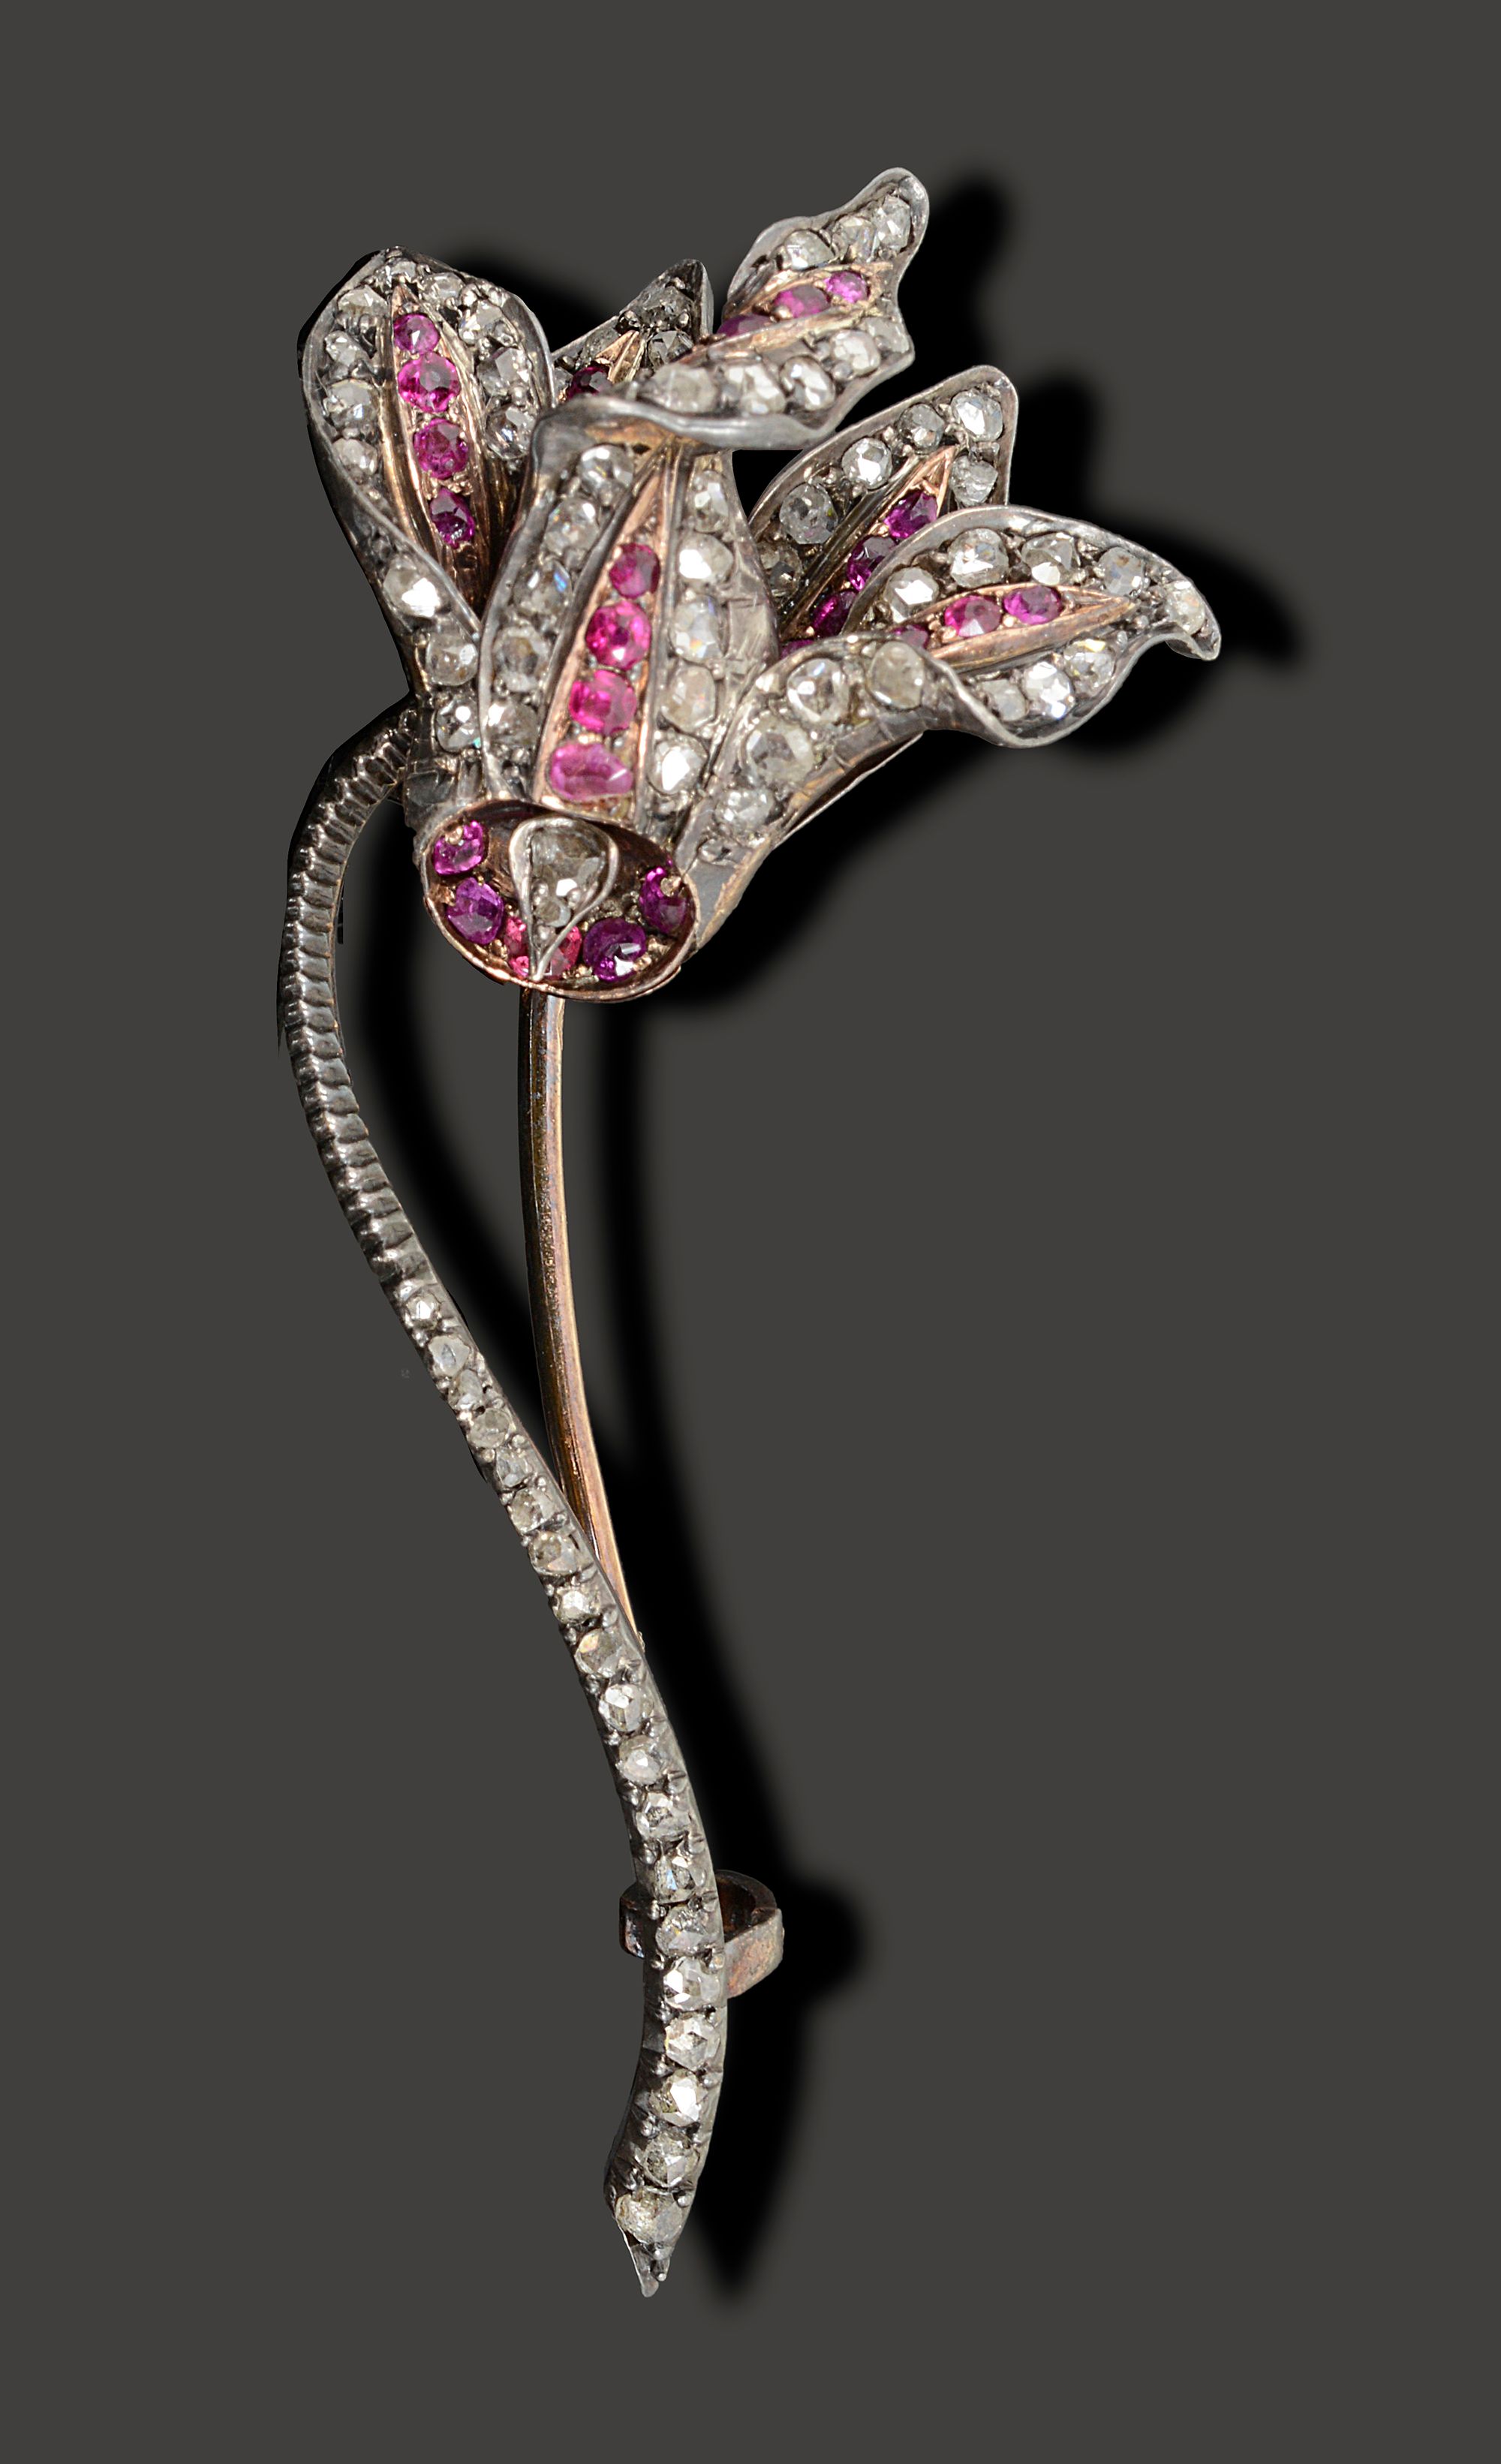 A French late 19th century diamond and ruby-set flower brooch